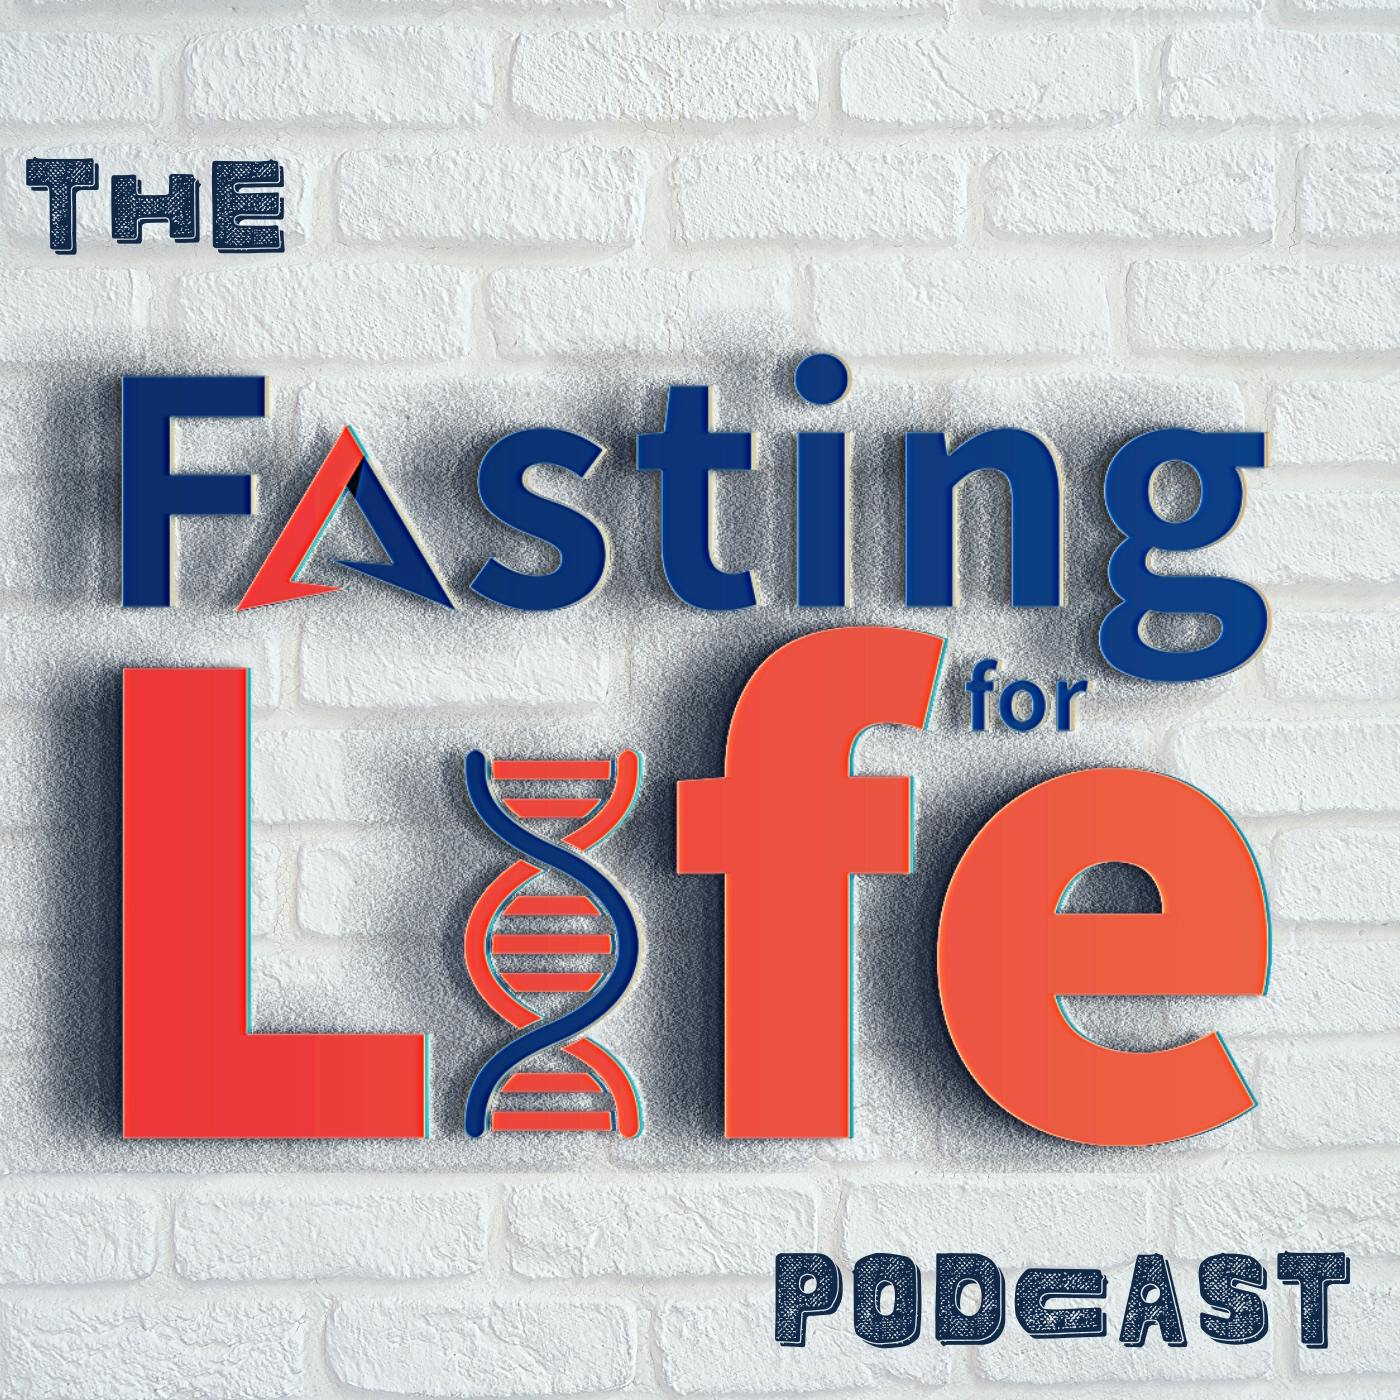 Ep. 164 - Lowering Blood Sugar & Reversing Pre-Diabetes | Is Low Carb or Intermittent Fasting better to lower HbA1c and increase Insulin Sensitivity? | Free Intermittent Fasting Plan Blueprint to Fat 